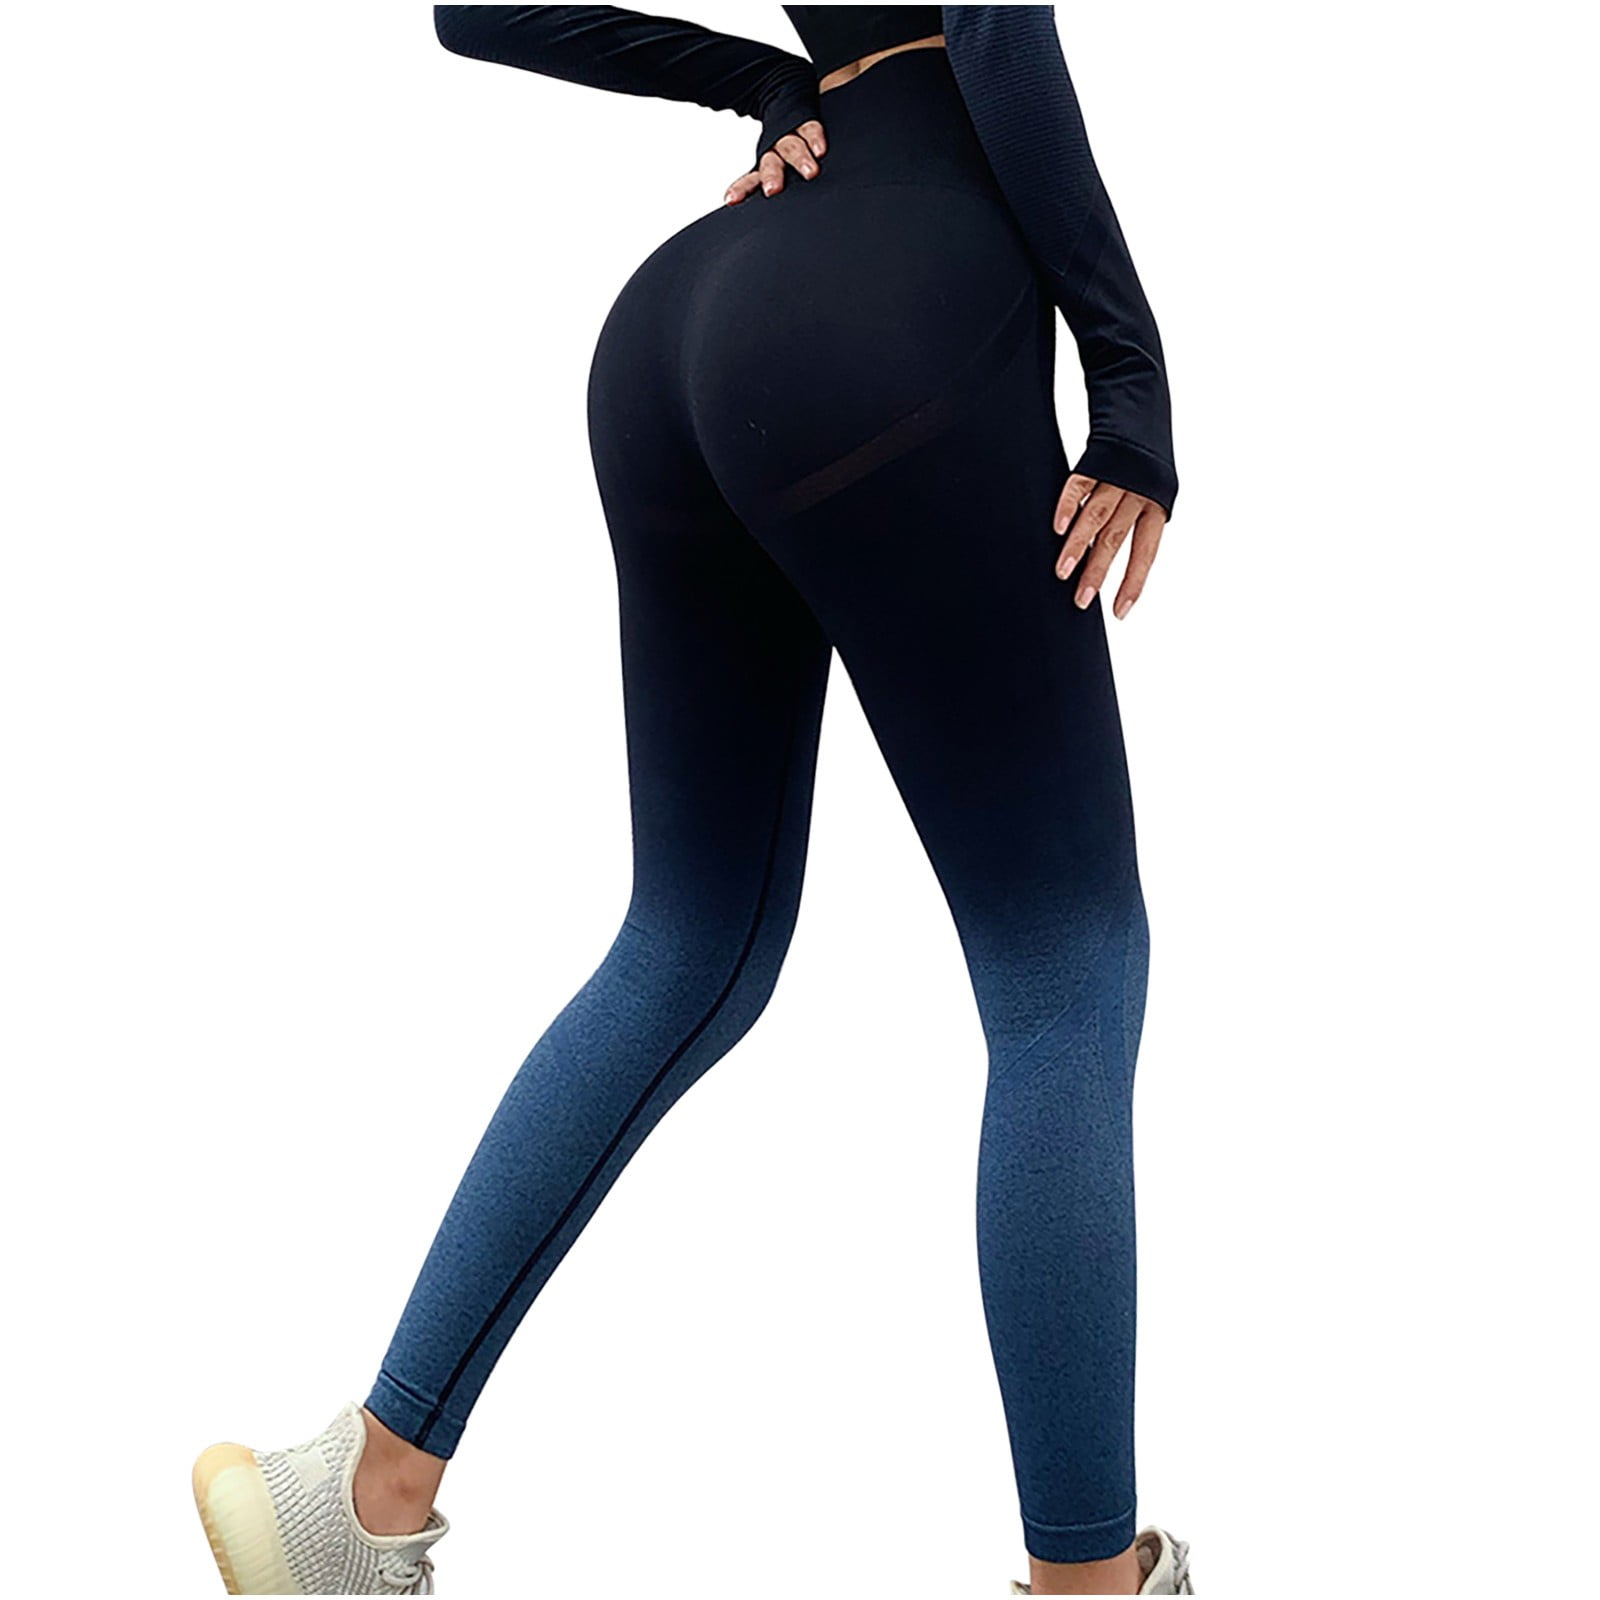 Sports Yoga Pants For Women Casual Solid Solor Straight Sleeve